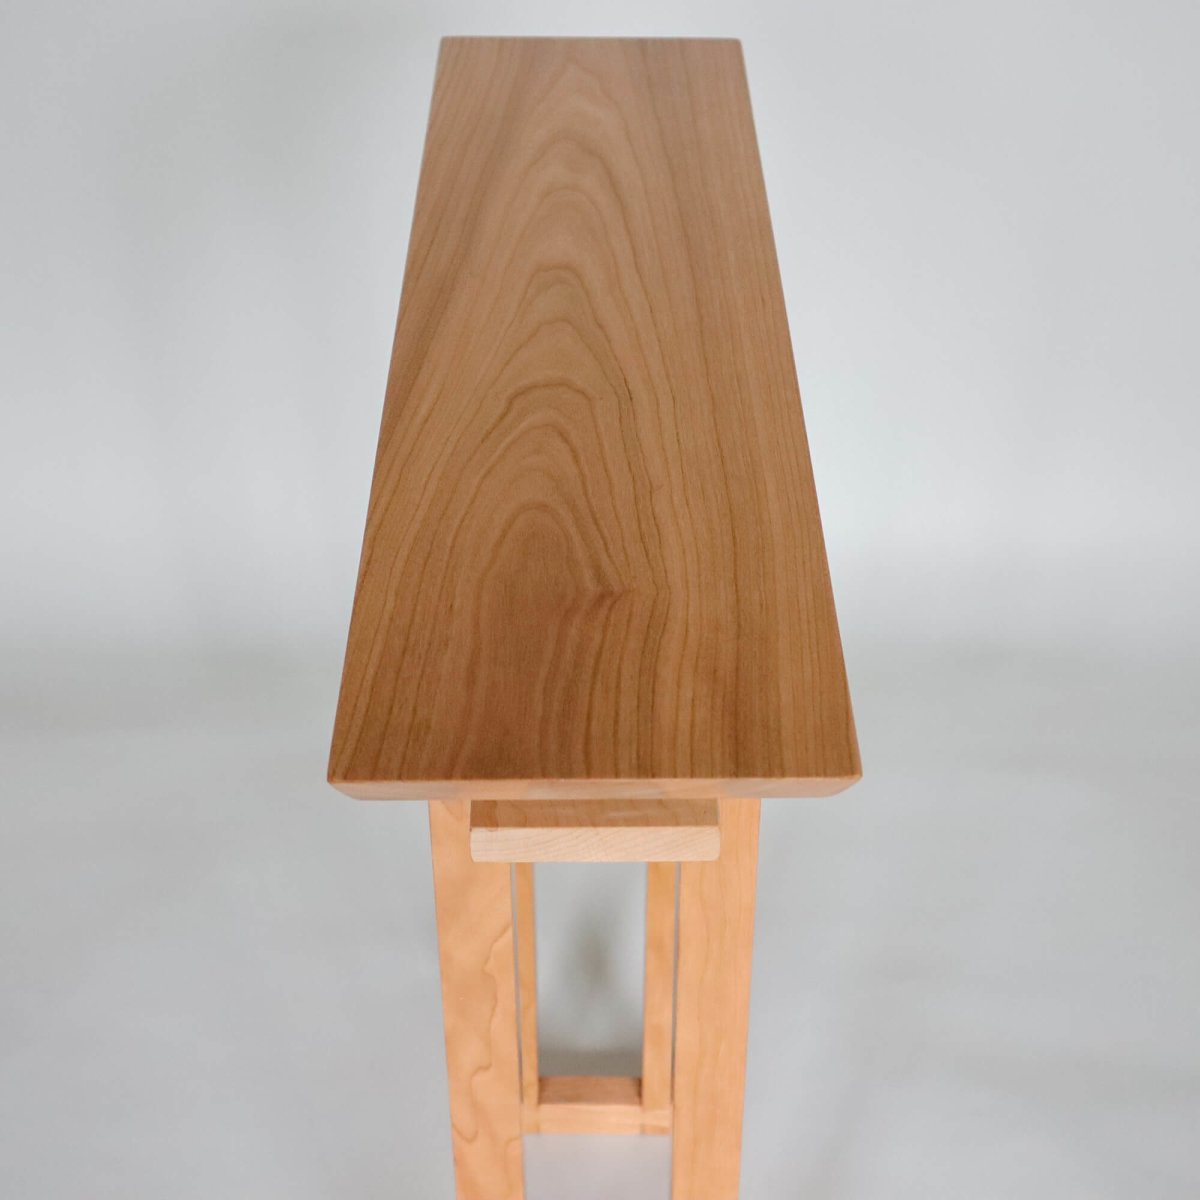 How to decorate a small entryway? with a narrow side table 7 inches deep from Mokuzai Furniture